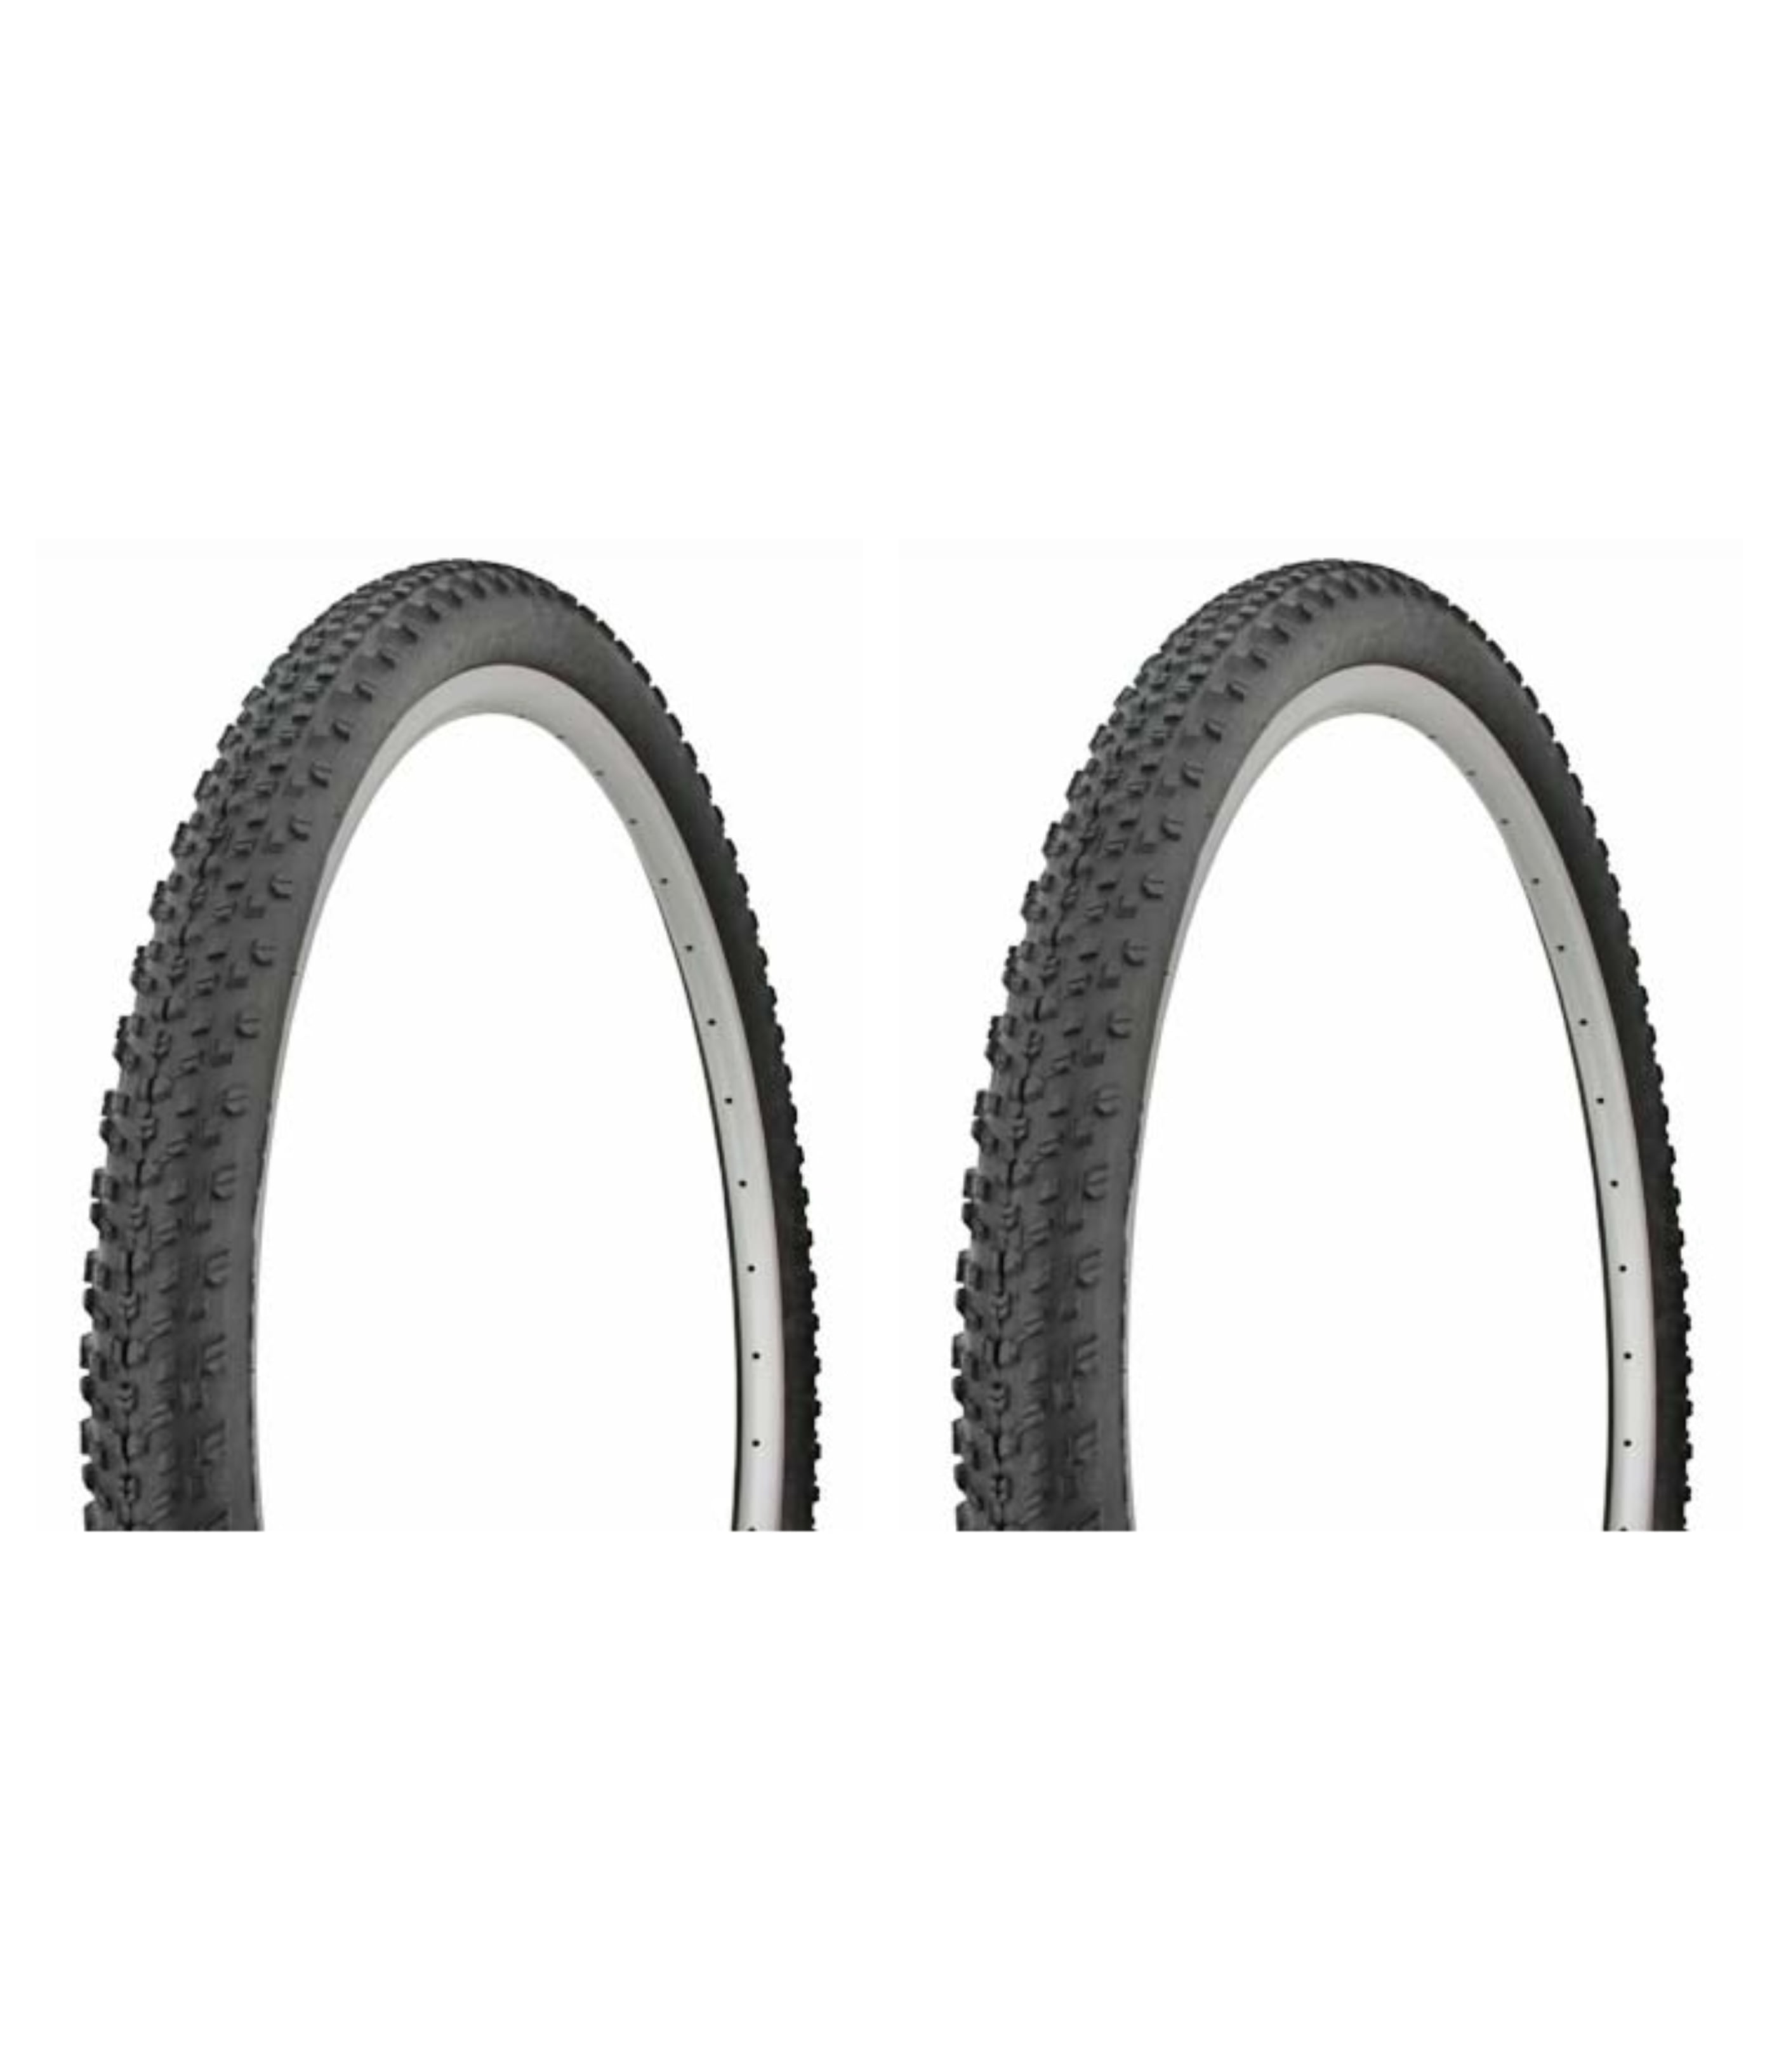 2 Inner Tubes 2 Pair of Bike Bicycle Tire Duro 26" x 2.10" All Black DB-1072 